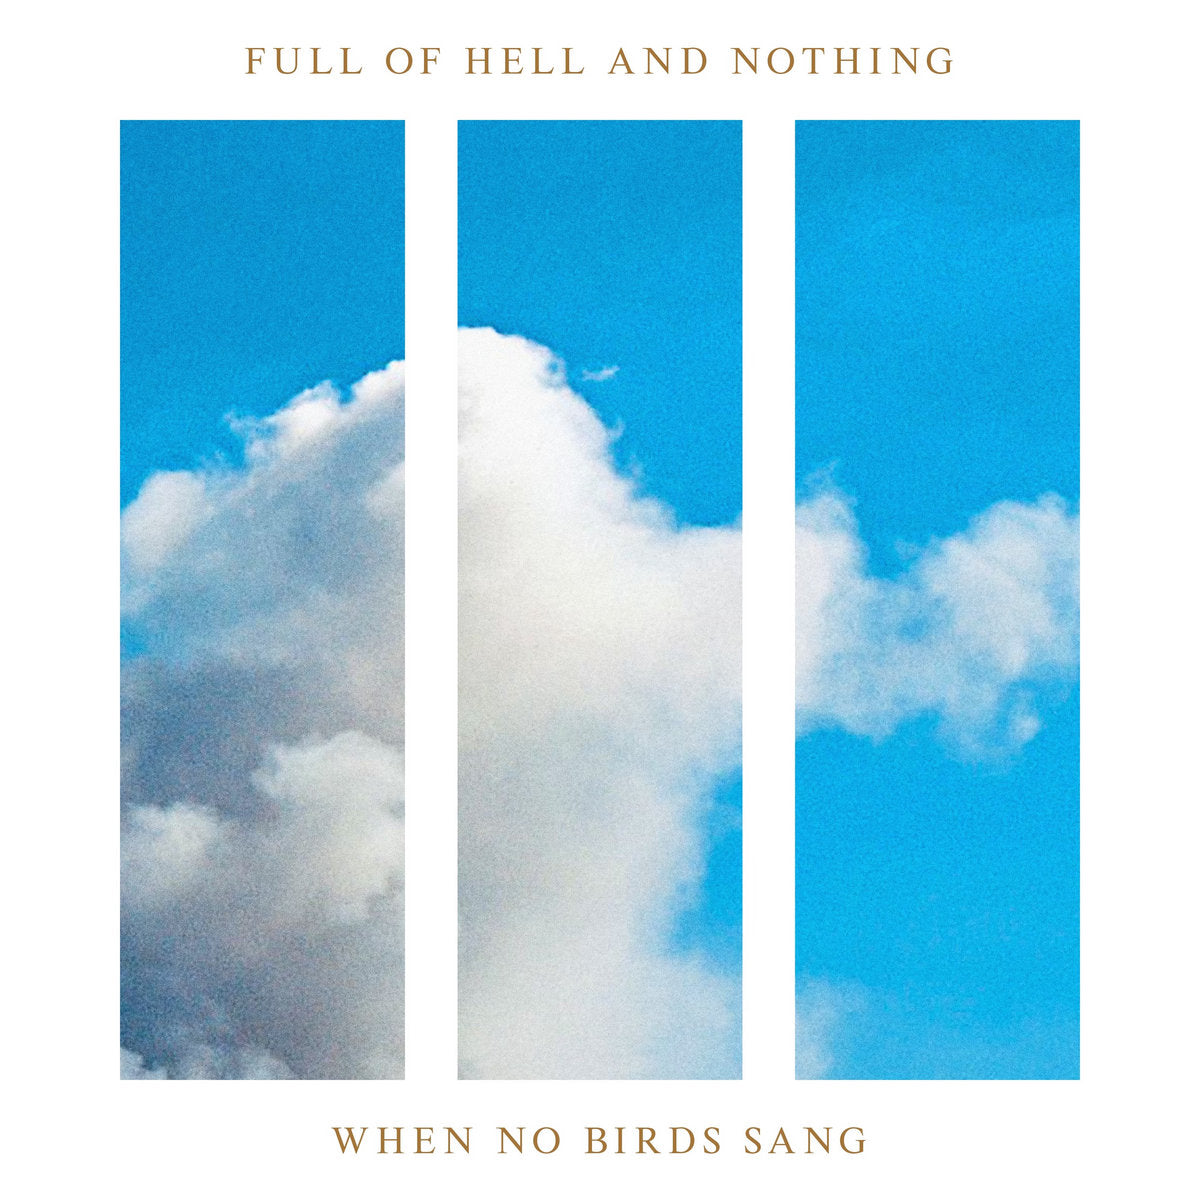 Full of Hell & Nothing  "When No Birds Sang" CD